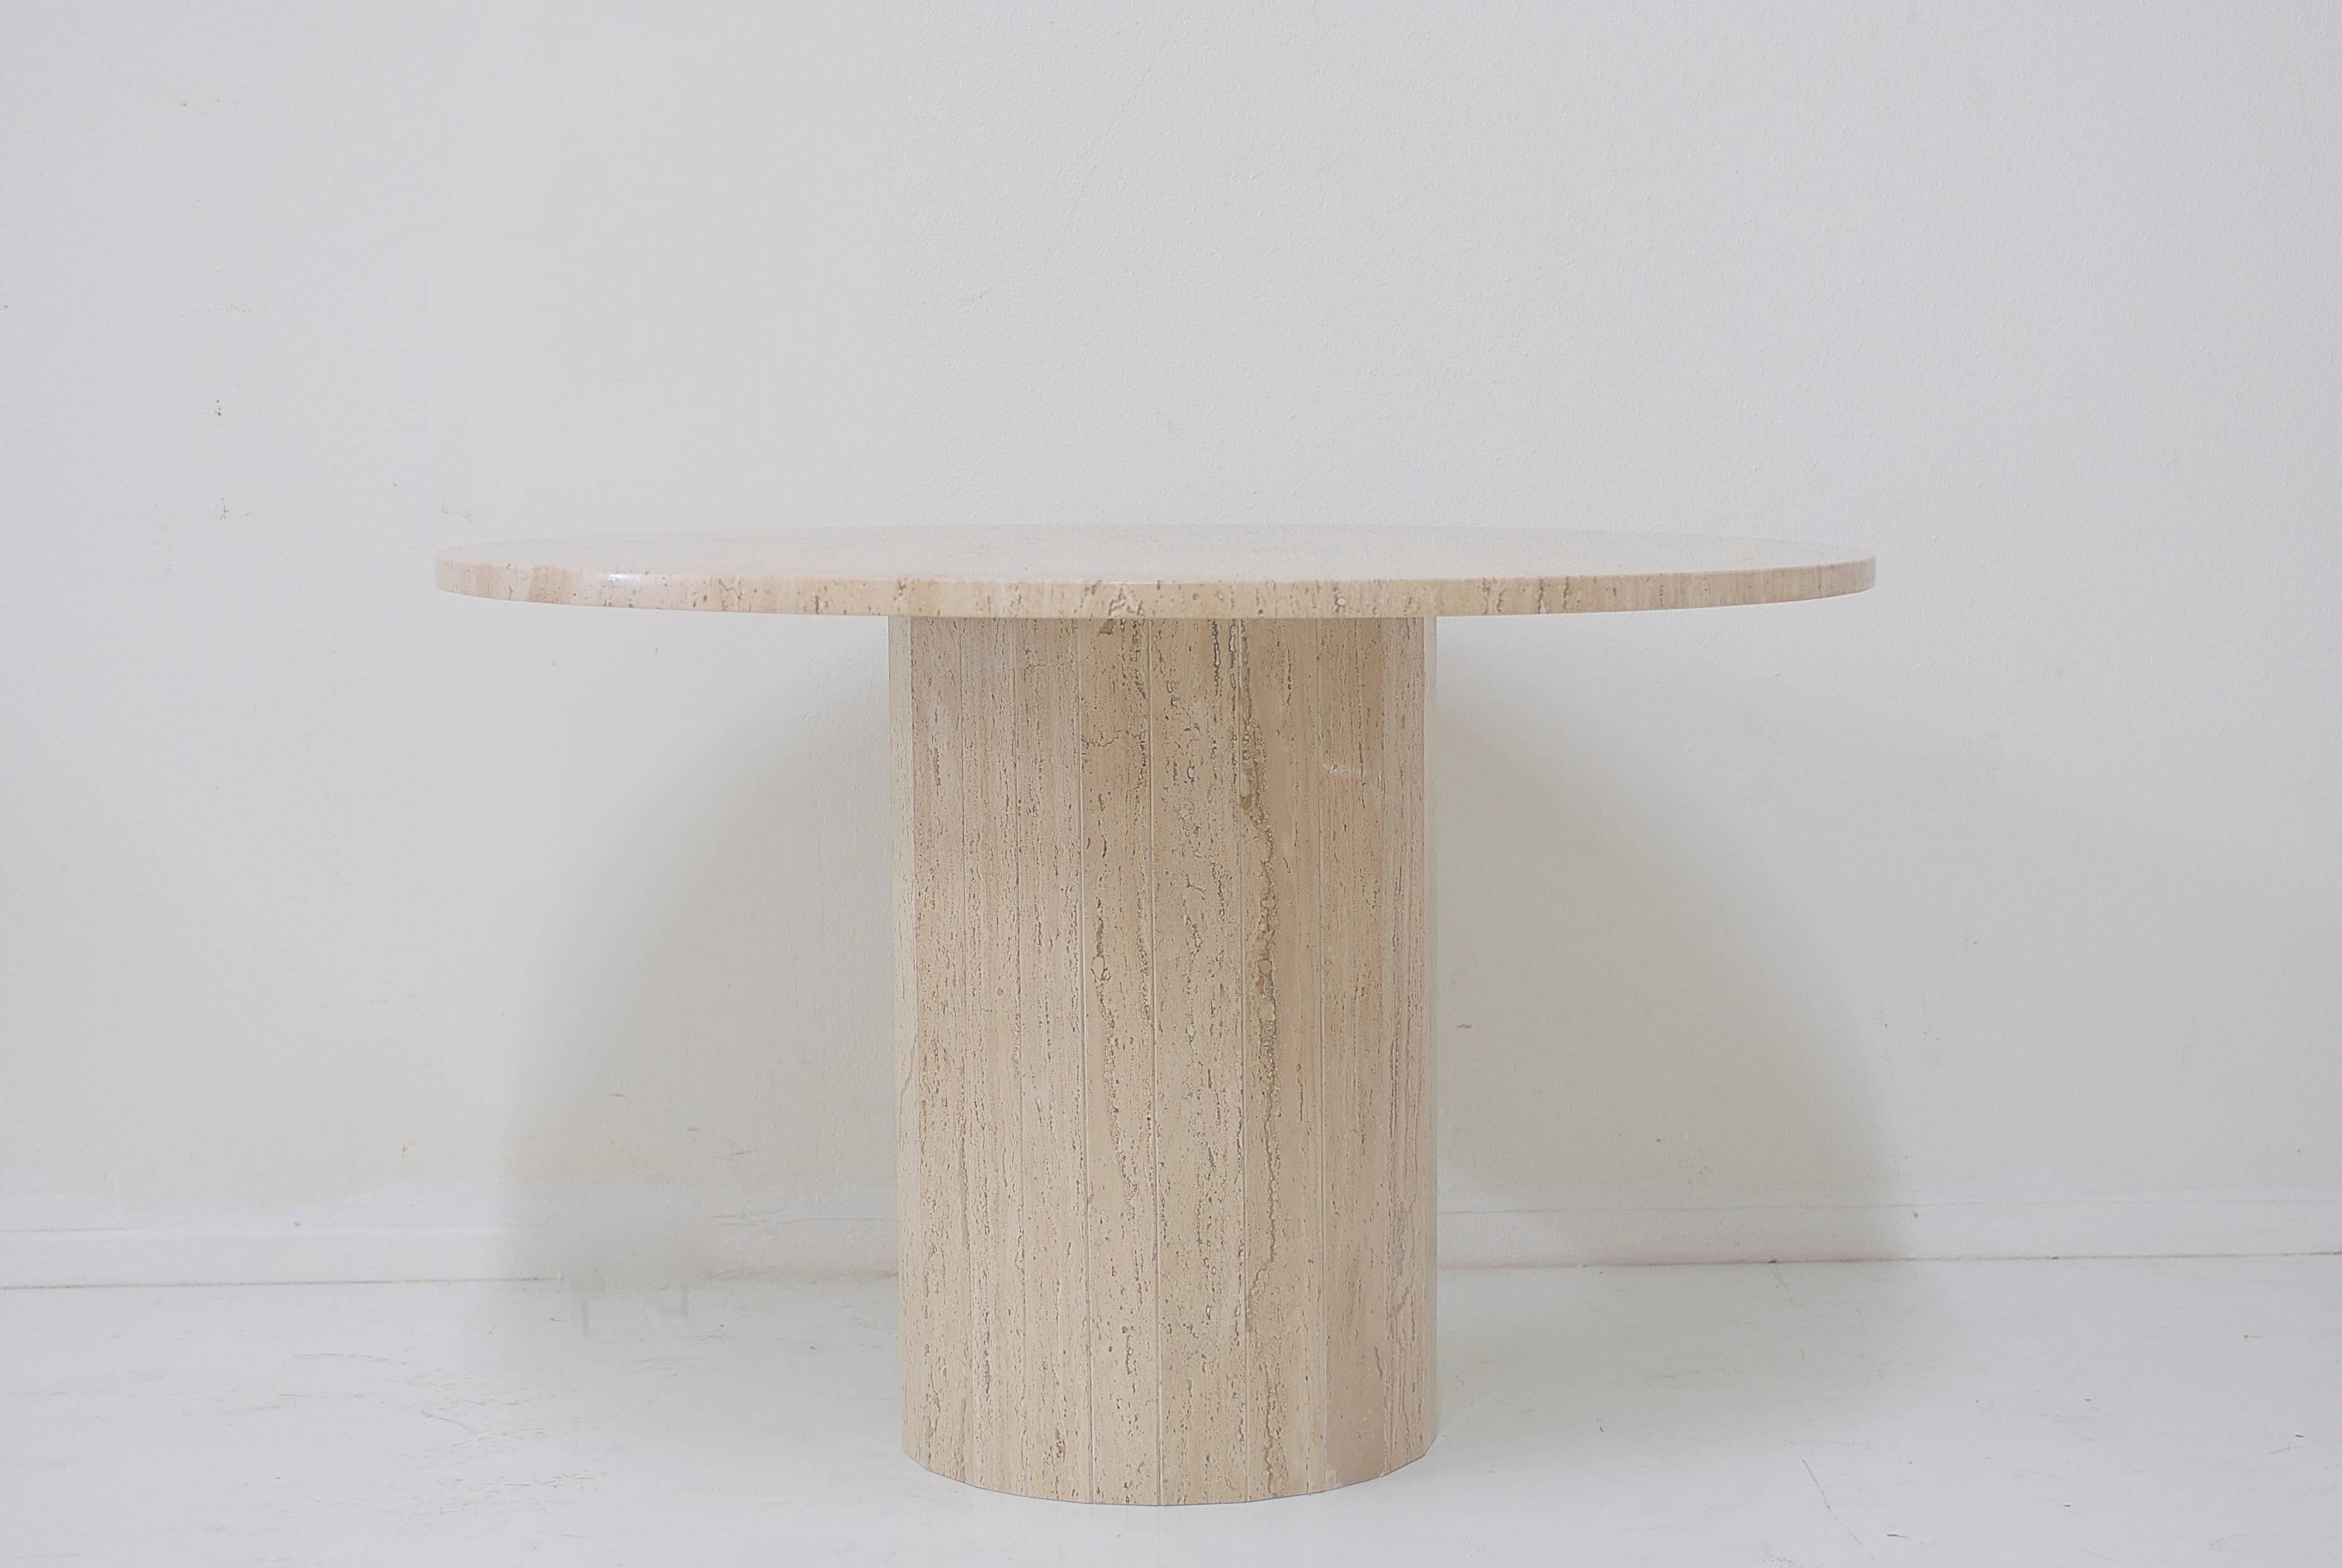 A modern Classic travertine table with gorgeous veining throughout. The 44